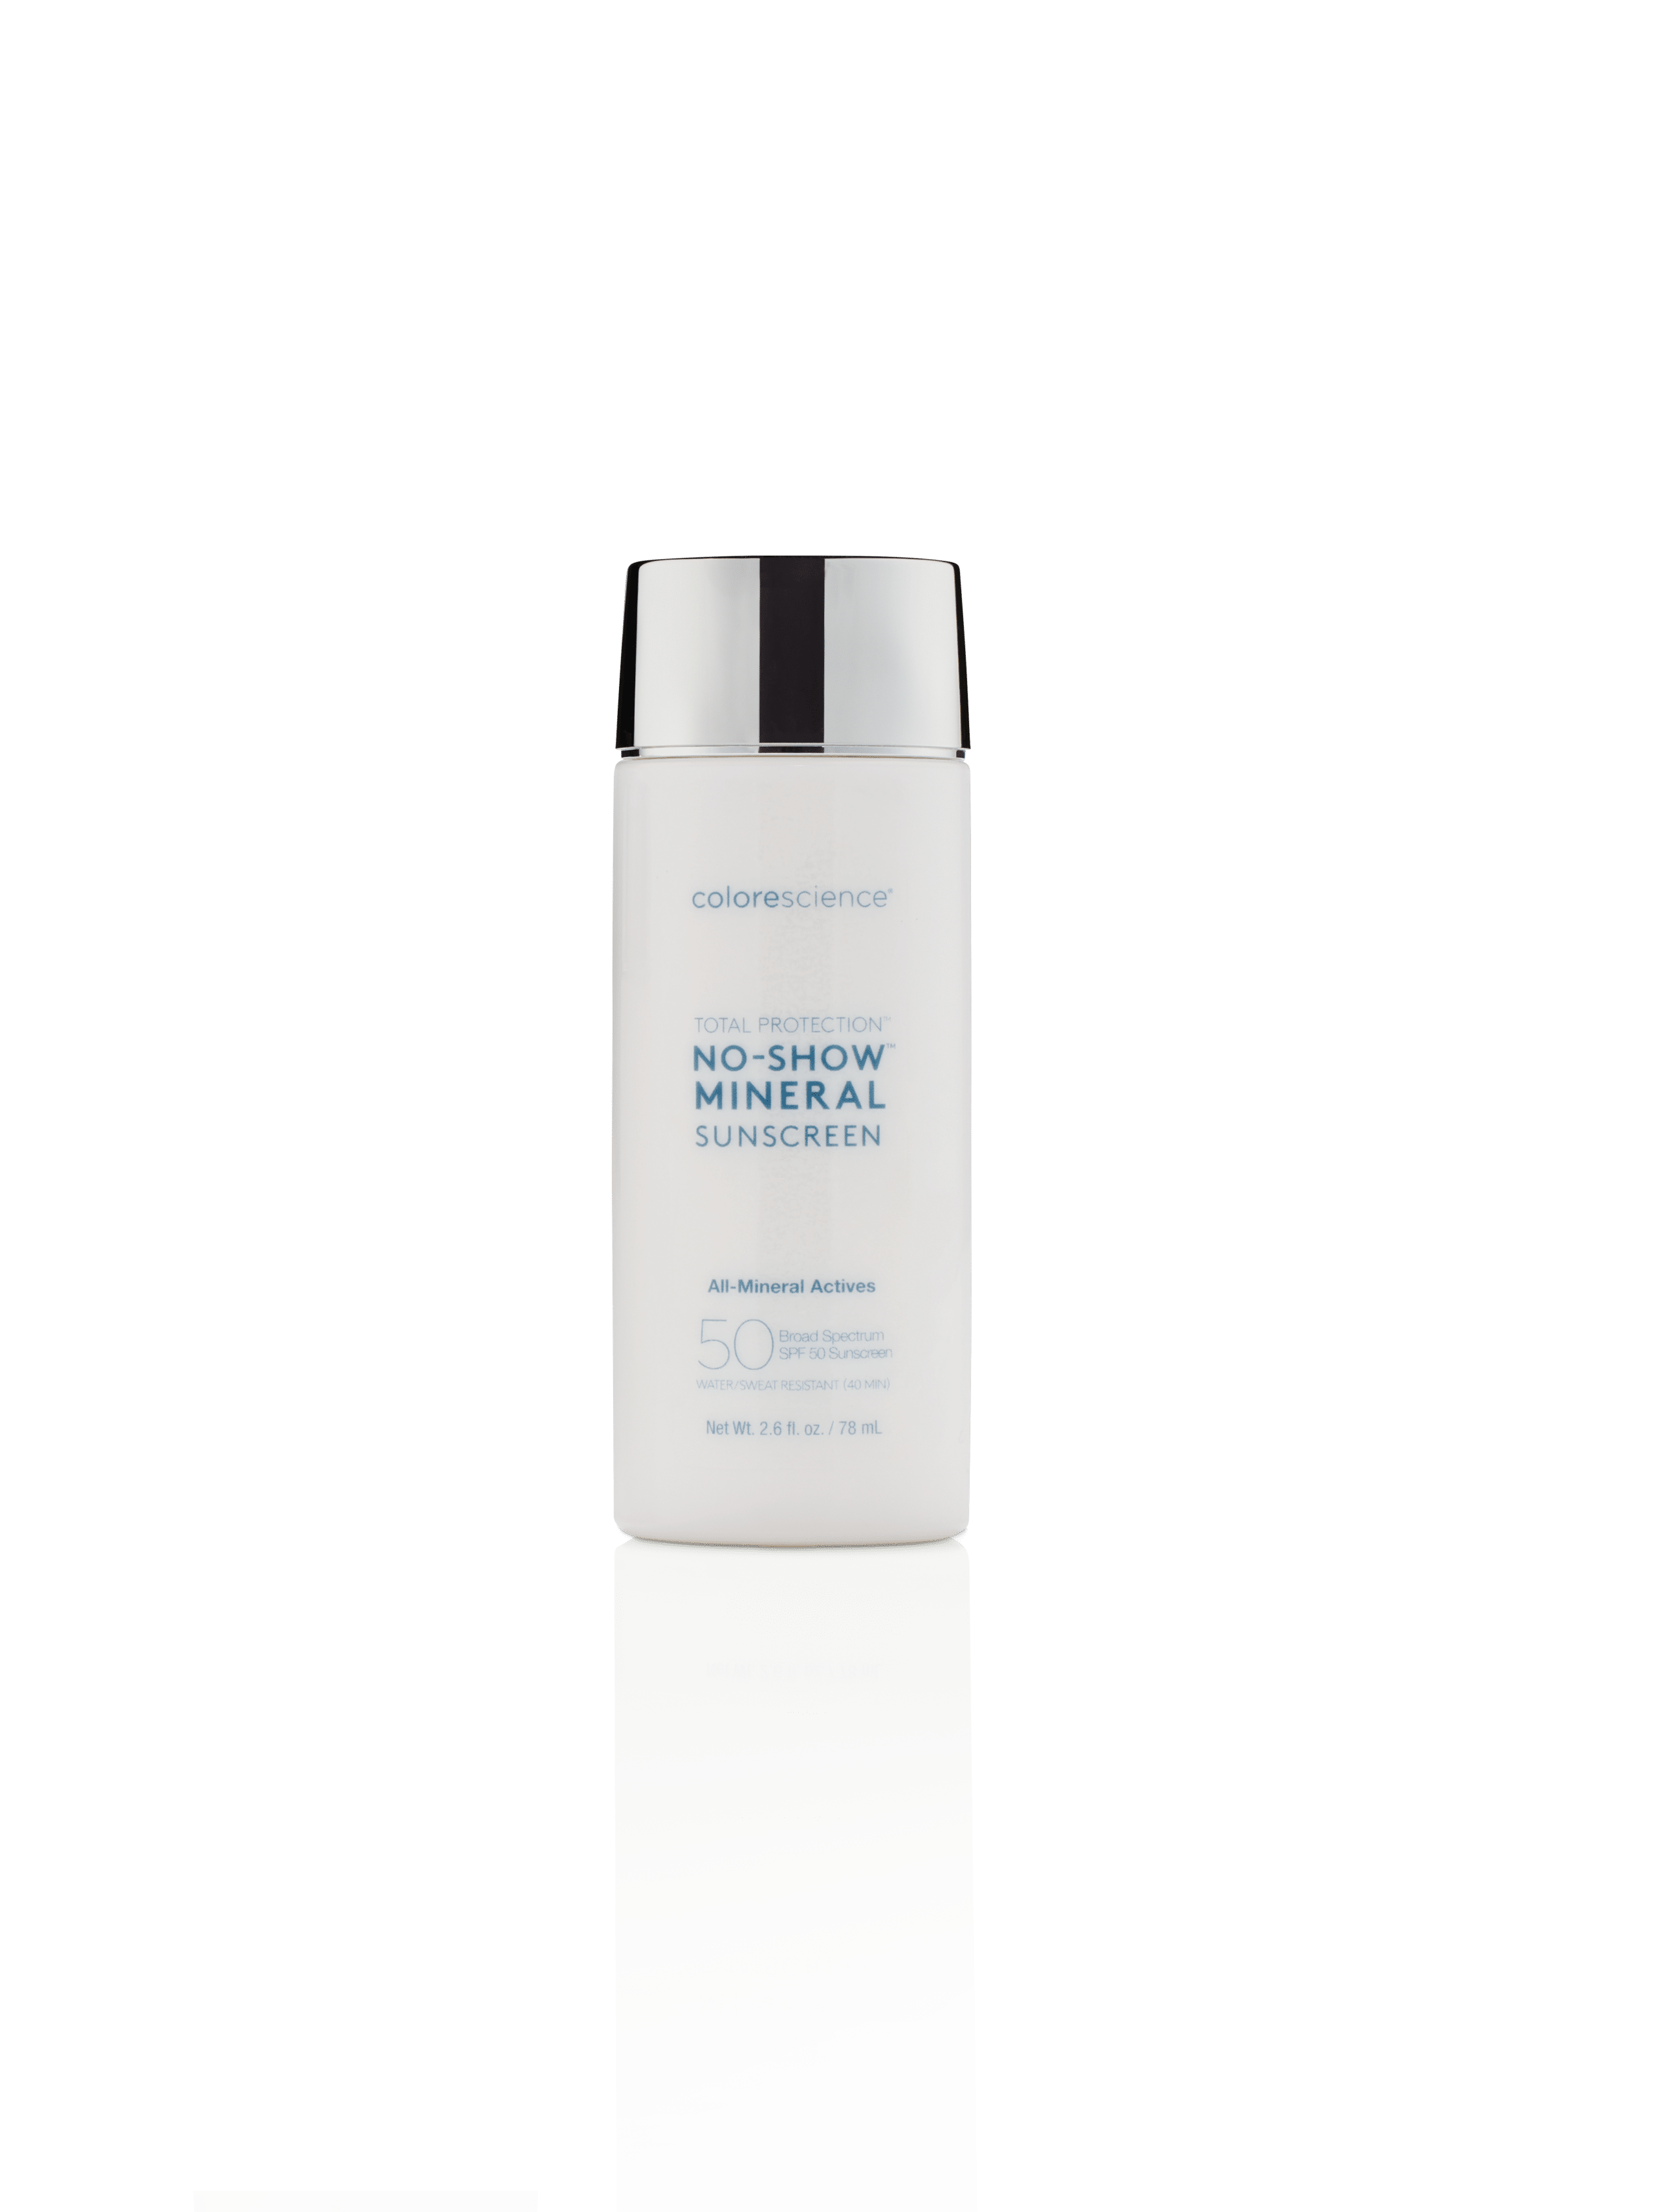 Colorscience Mineral Sunscreen